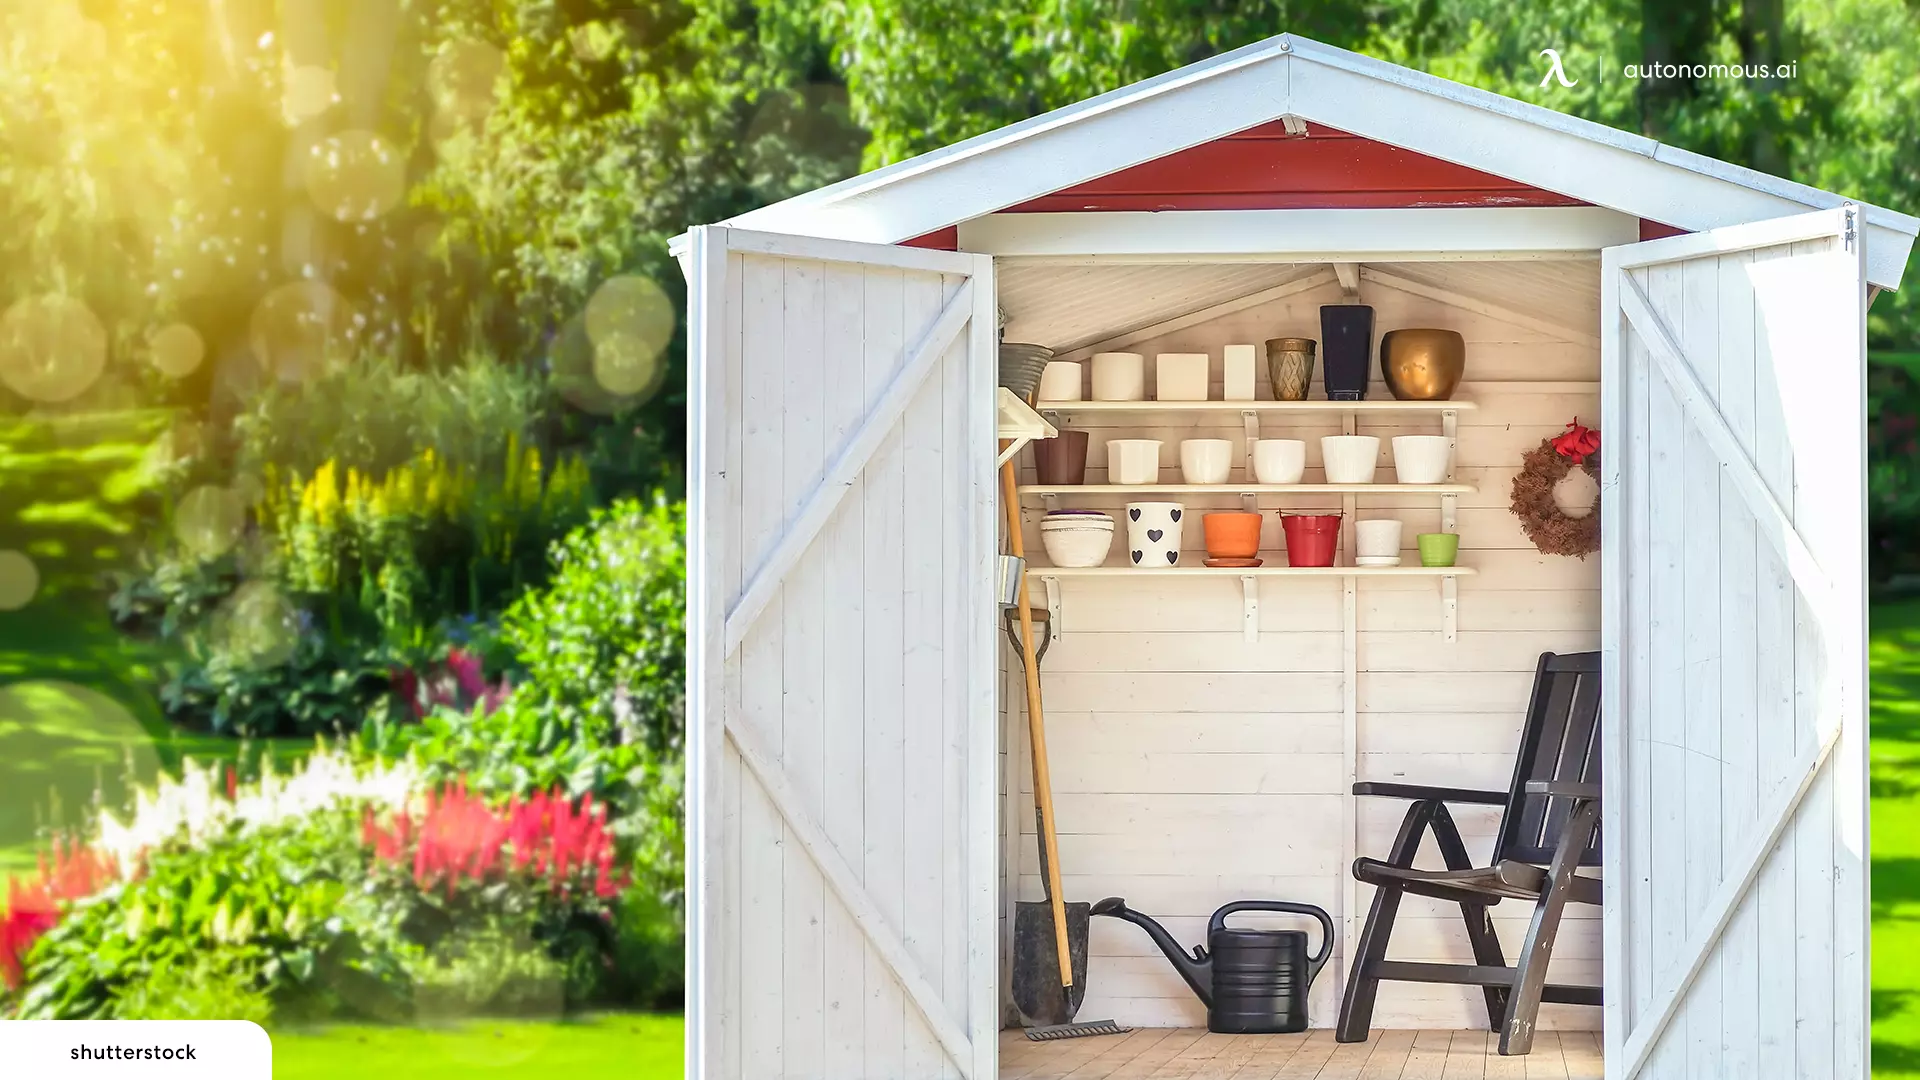 Why Should You Get a Prefab Garden Shed?